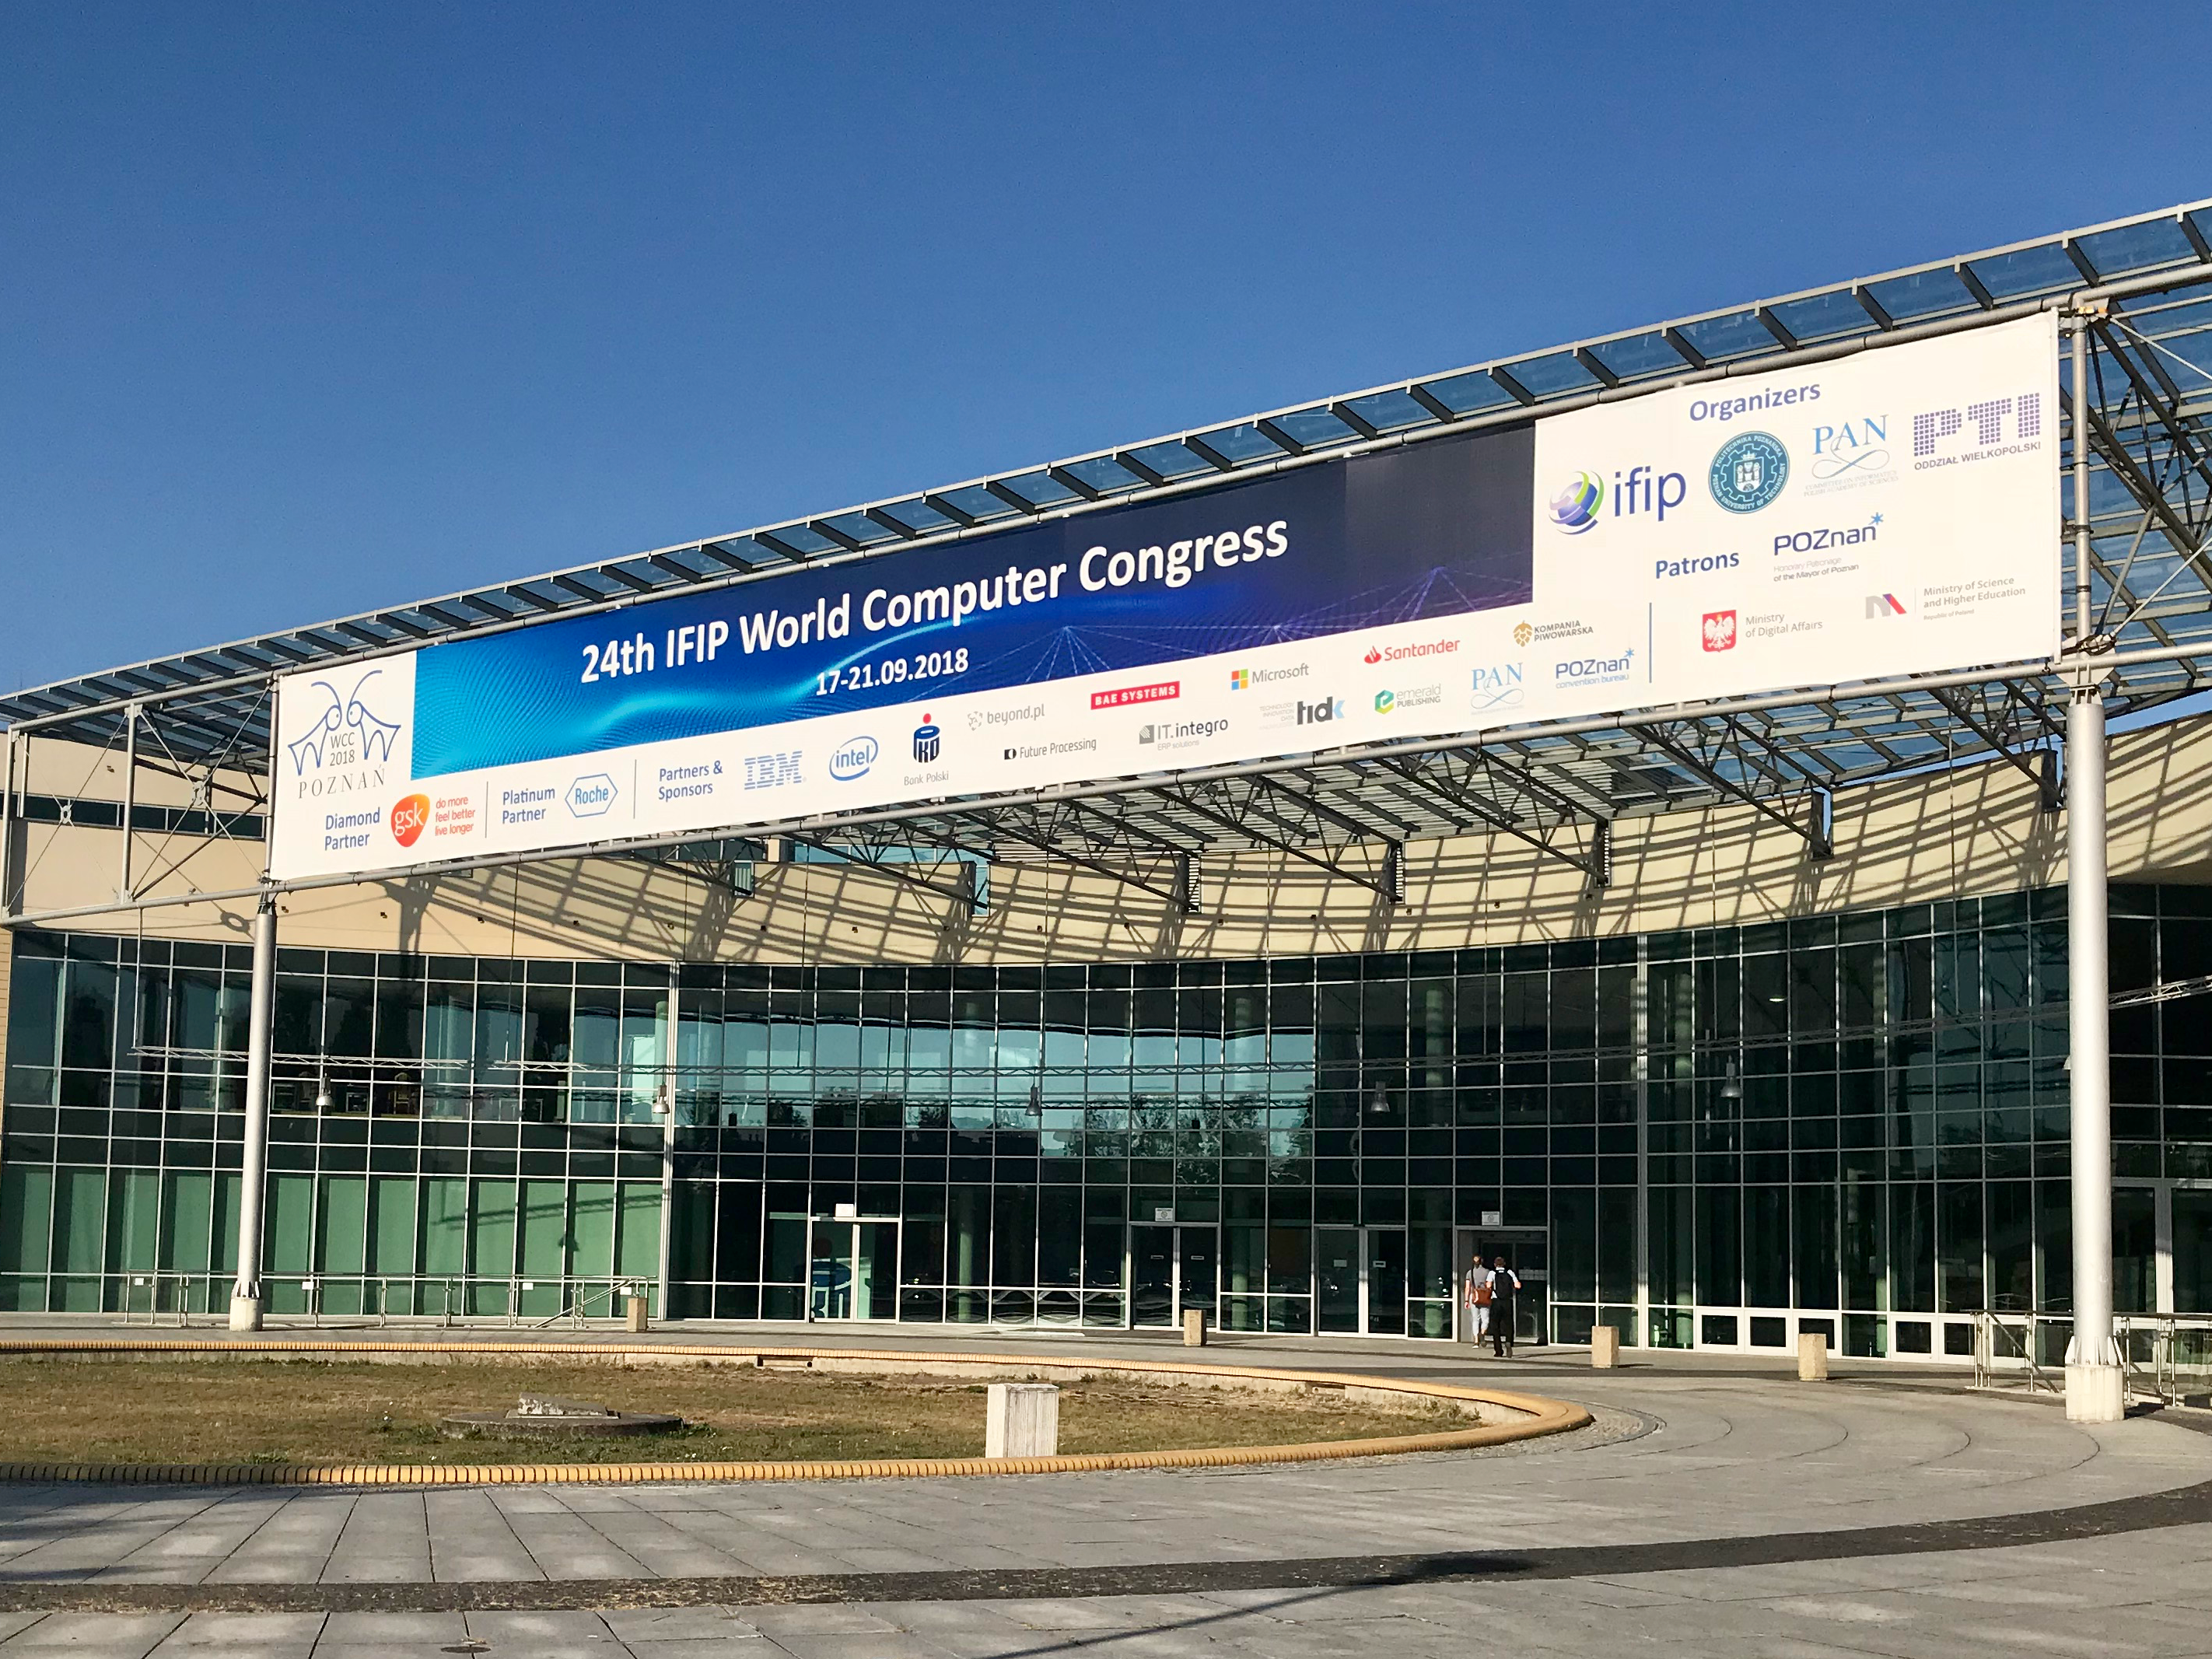 The 24th IFIP World Congress was hosted by the Poznań University of Technology.